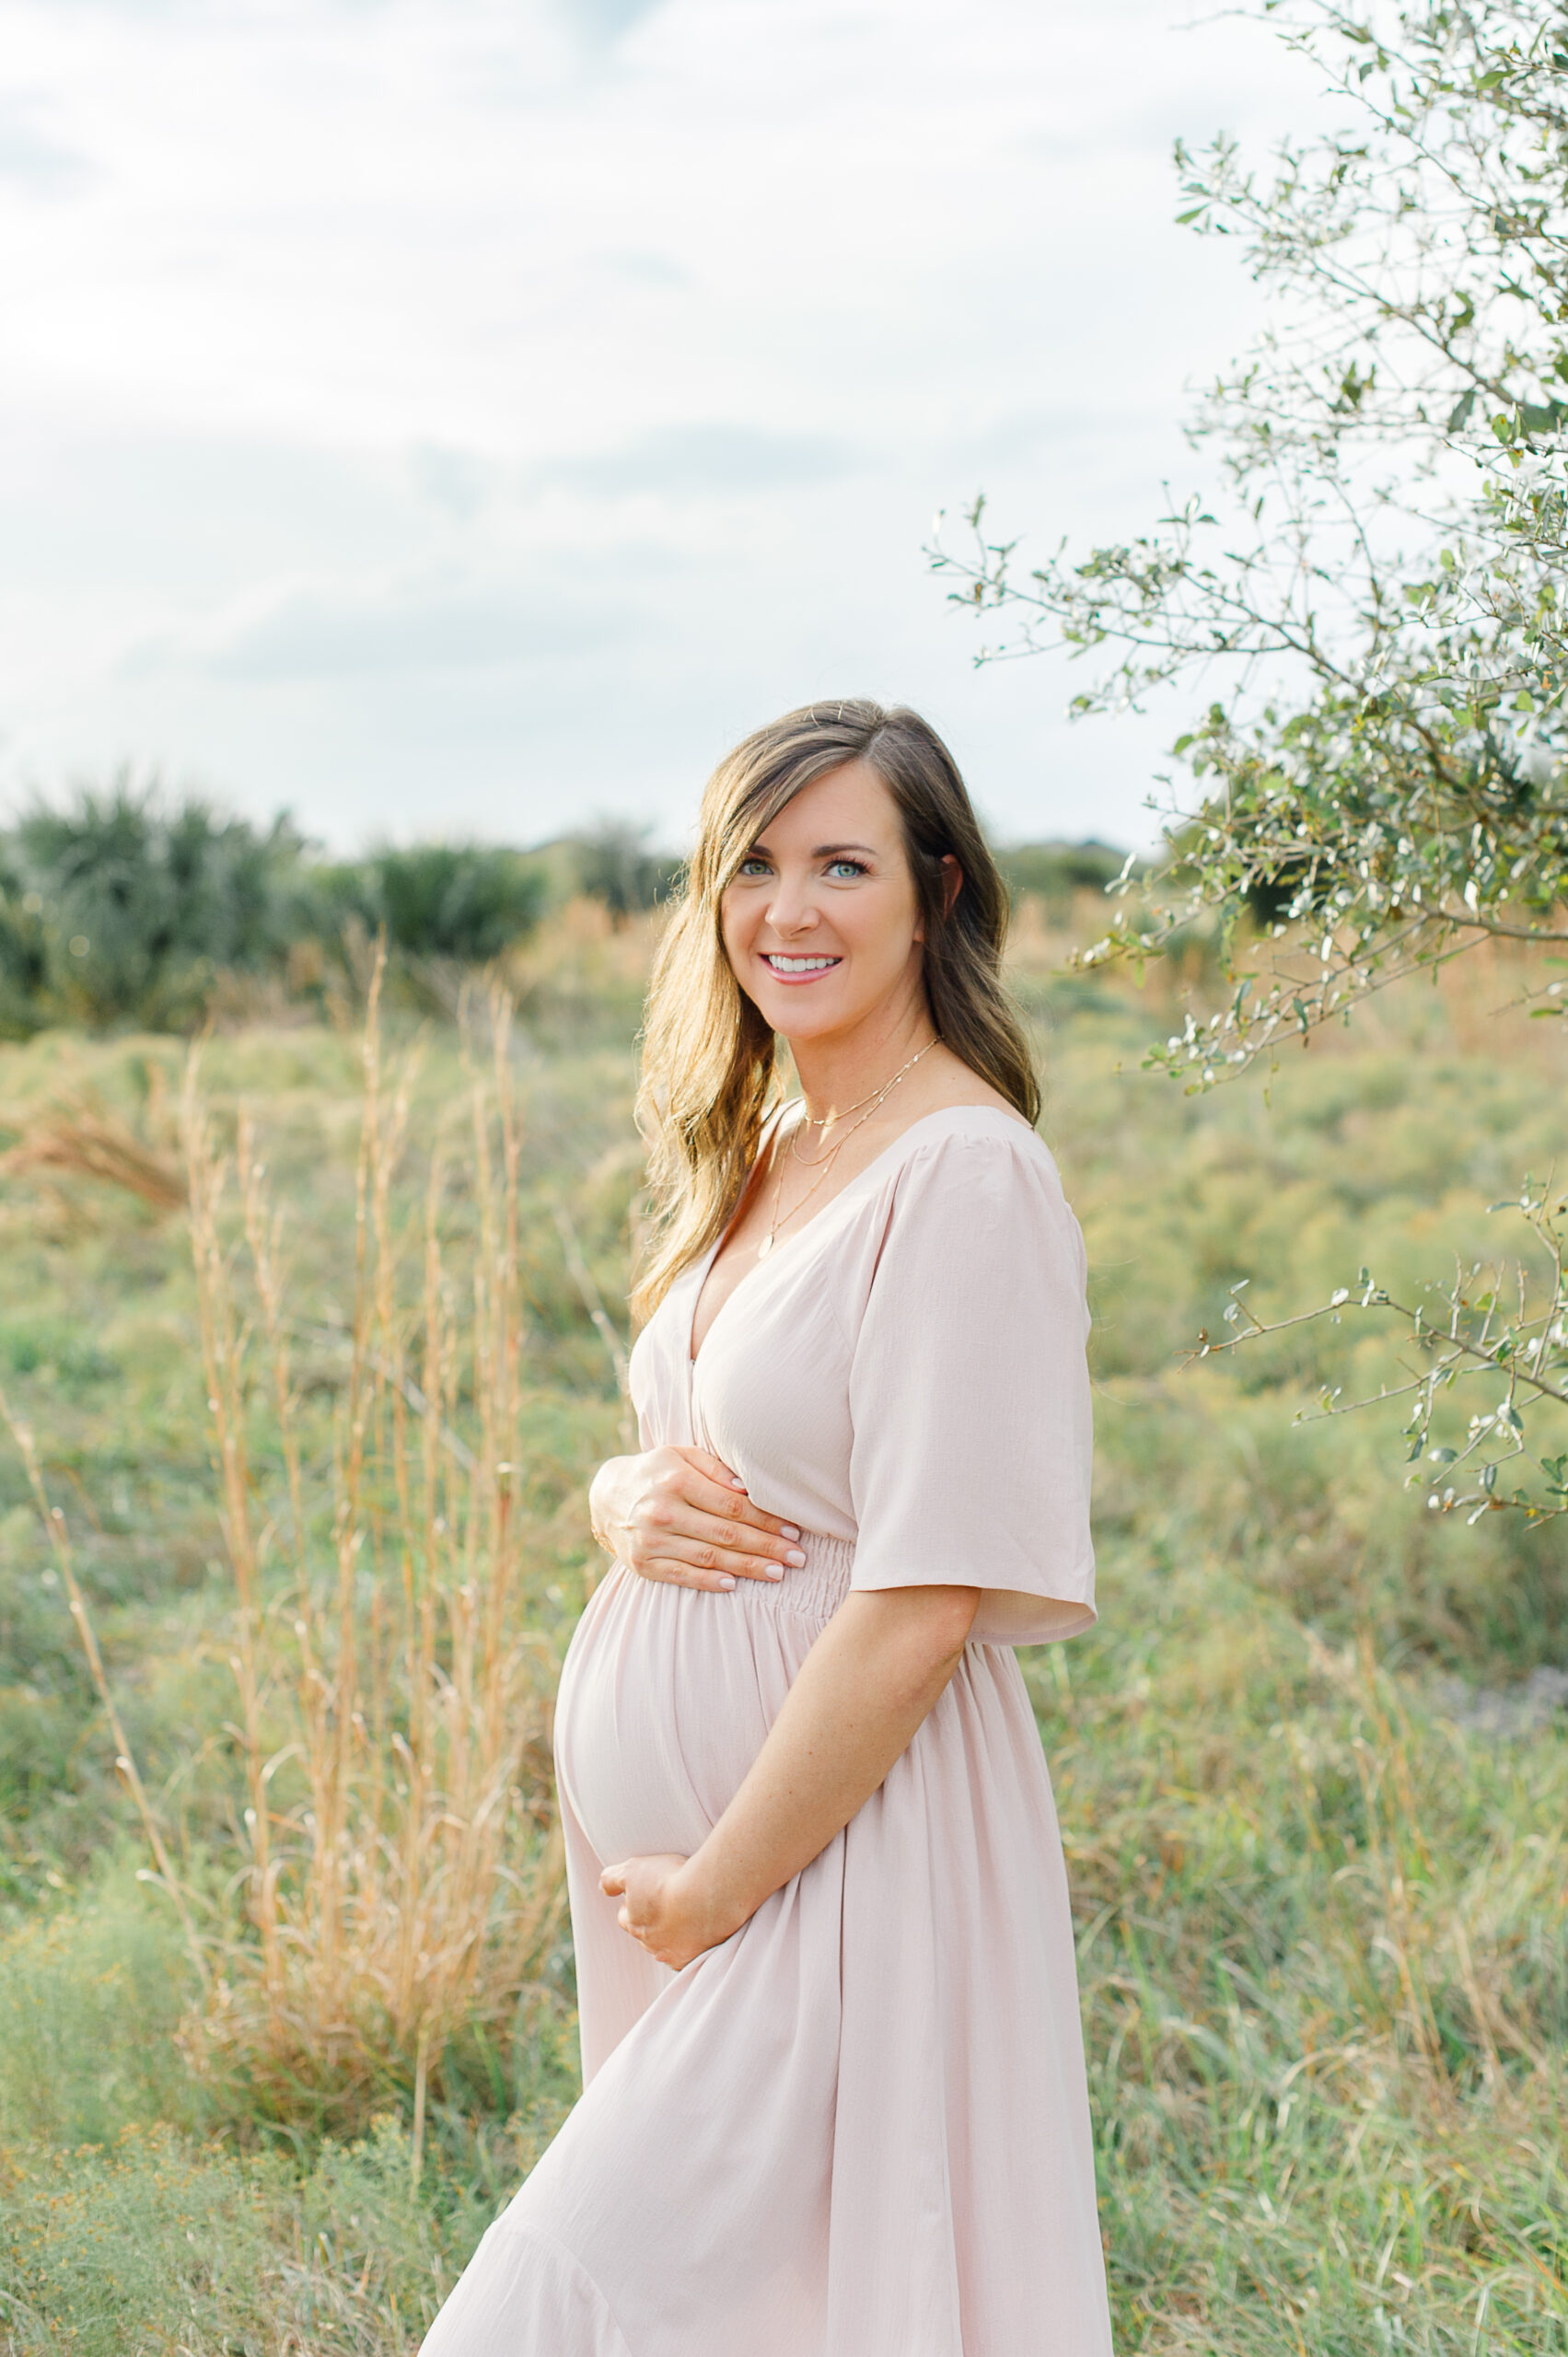 New mother standing in a field of tall grass holding her bump Orlando Birth Center